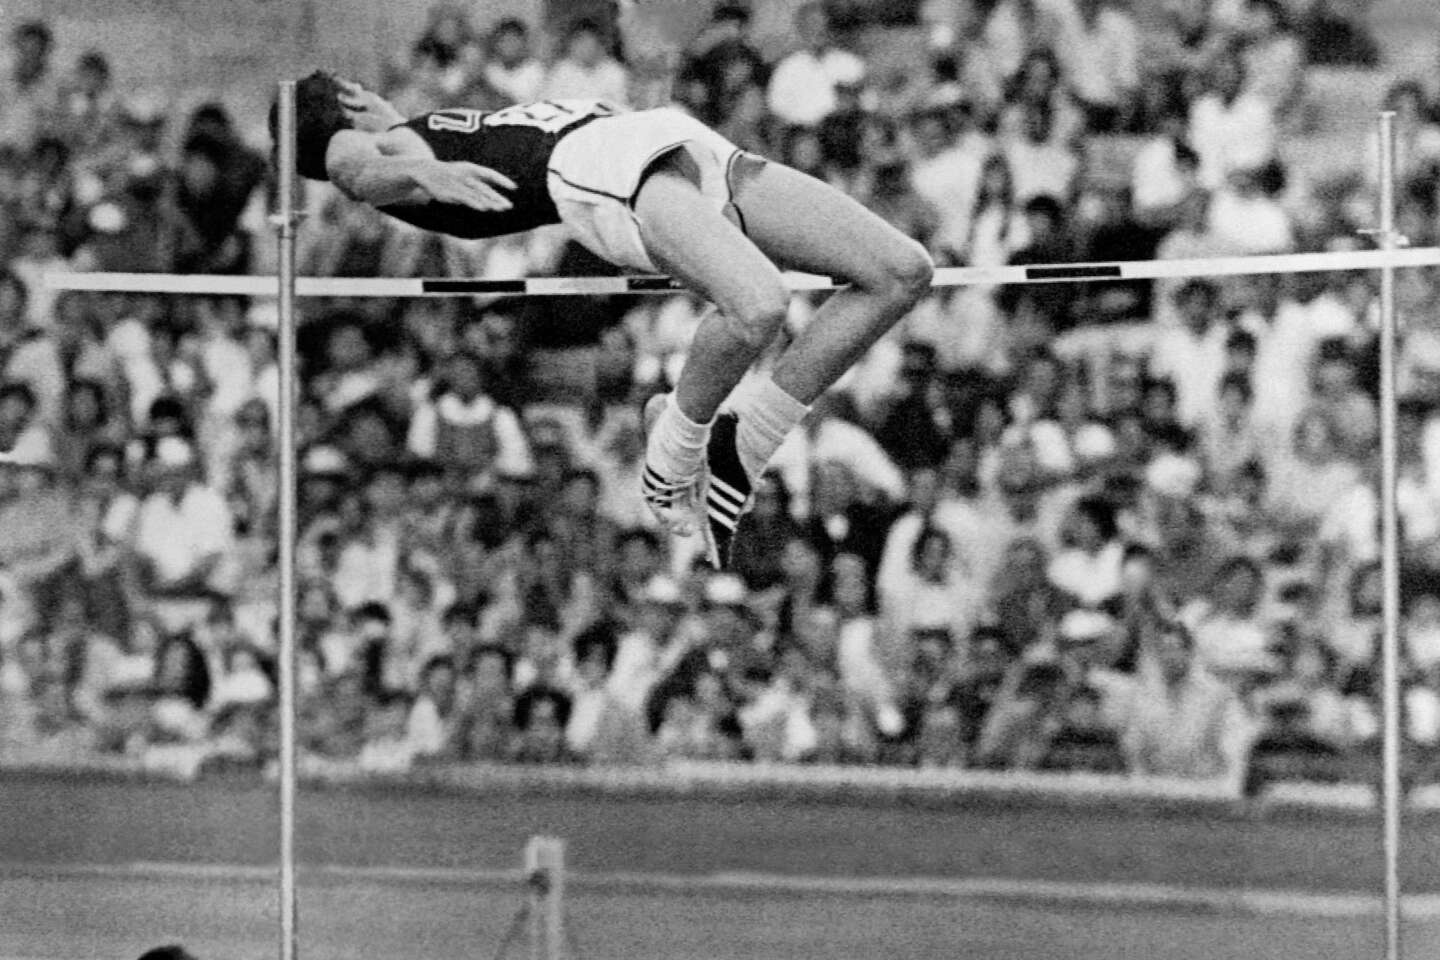 how the american athlete revolutionized the high jump